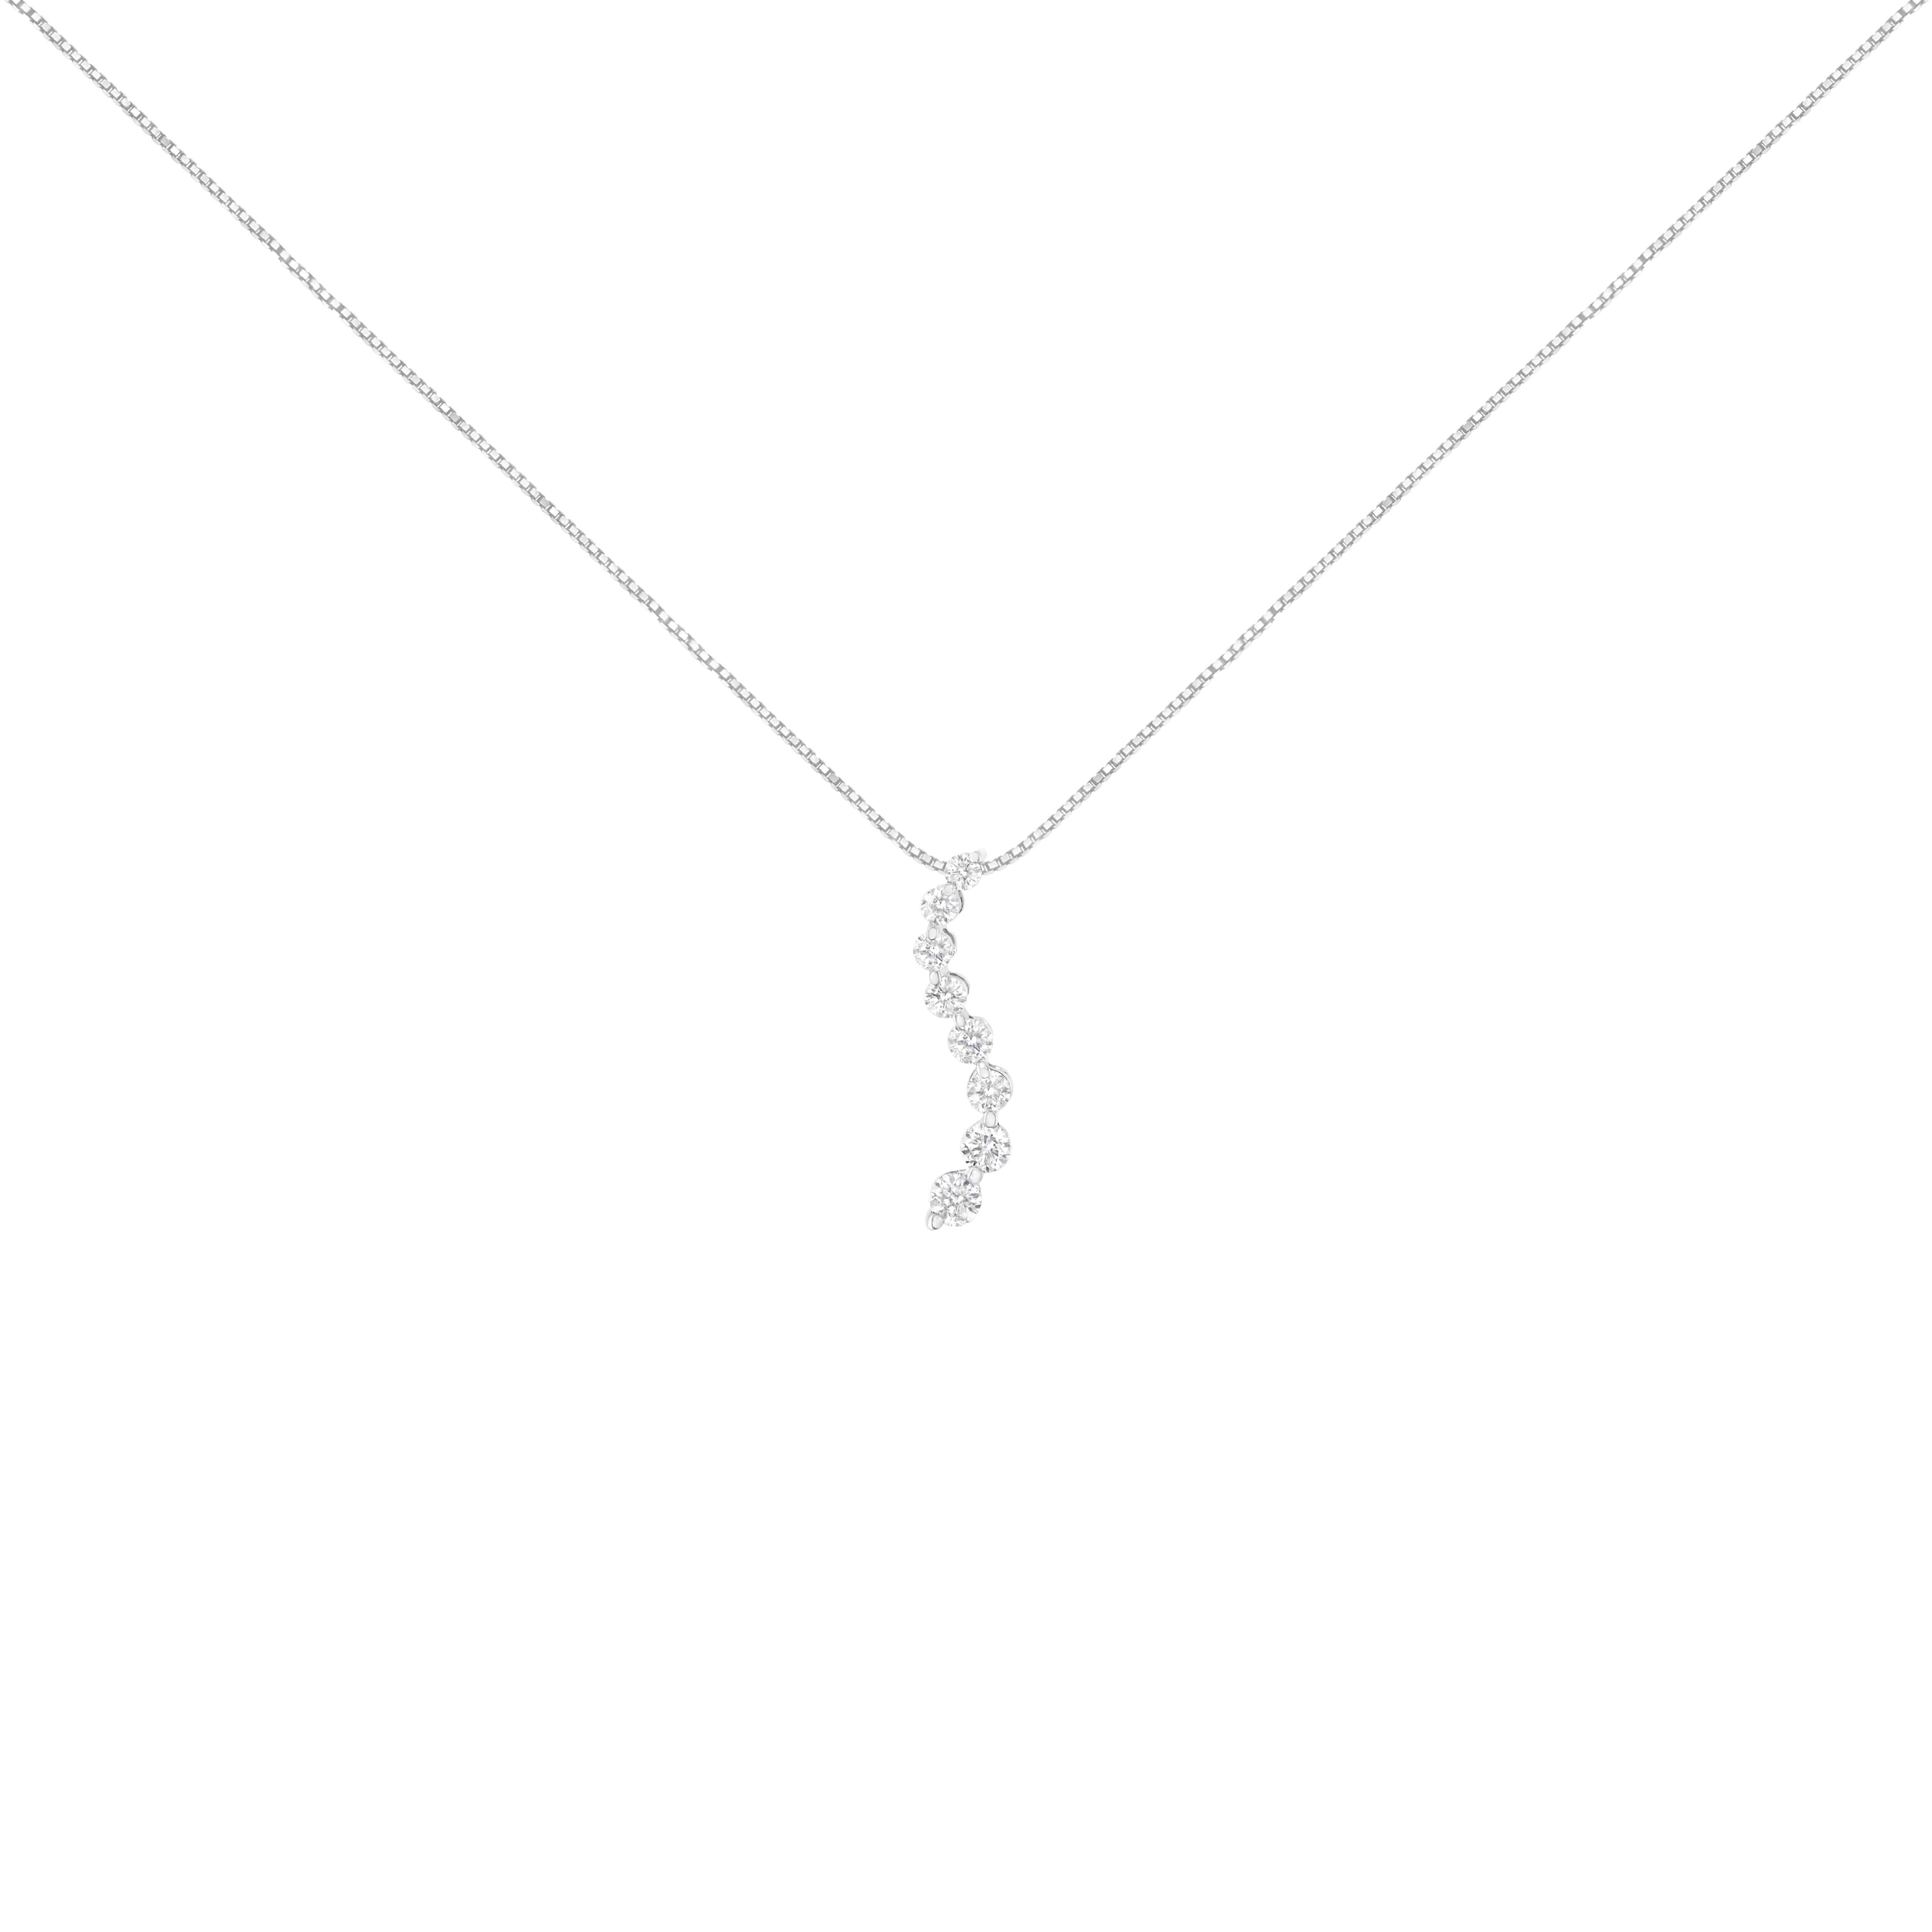 Surprise her by gifting her this beautiful 3.00 cttw diamond journey pendant on any special occasion. Featuring a classy design, the pendant is crafted of cool 14kt white gold. It is elegantly adorned with sparkling 8 graduating, prong-set round cut